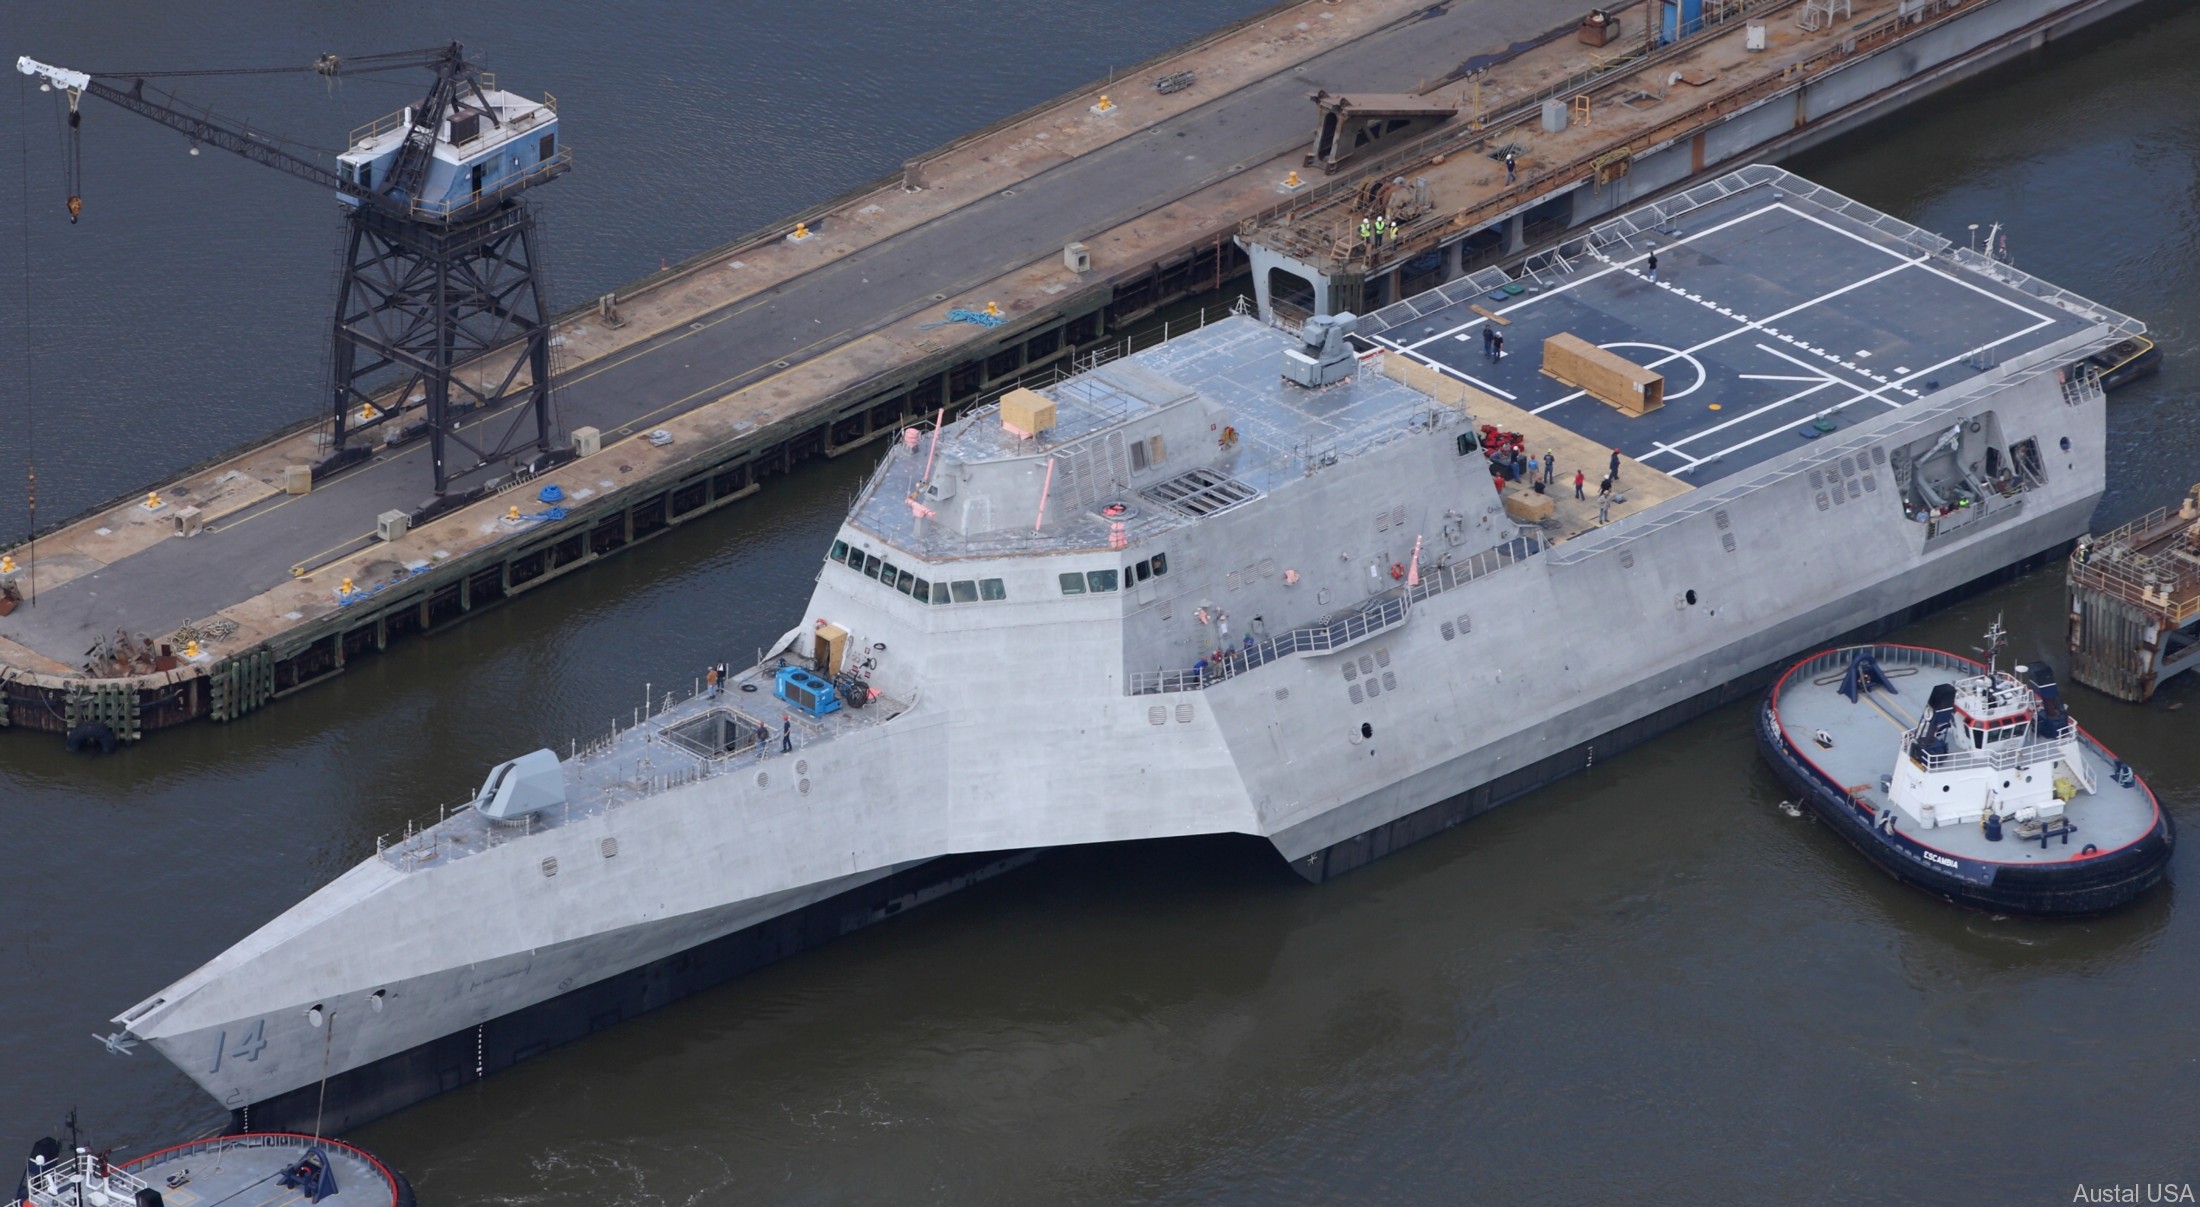 lcs-14 uss manchester littoral combat ship independence class us navy launching austal usa mobile alabama 19